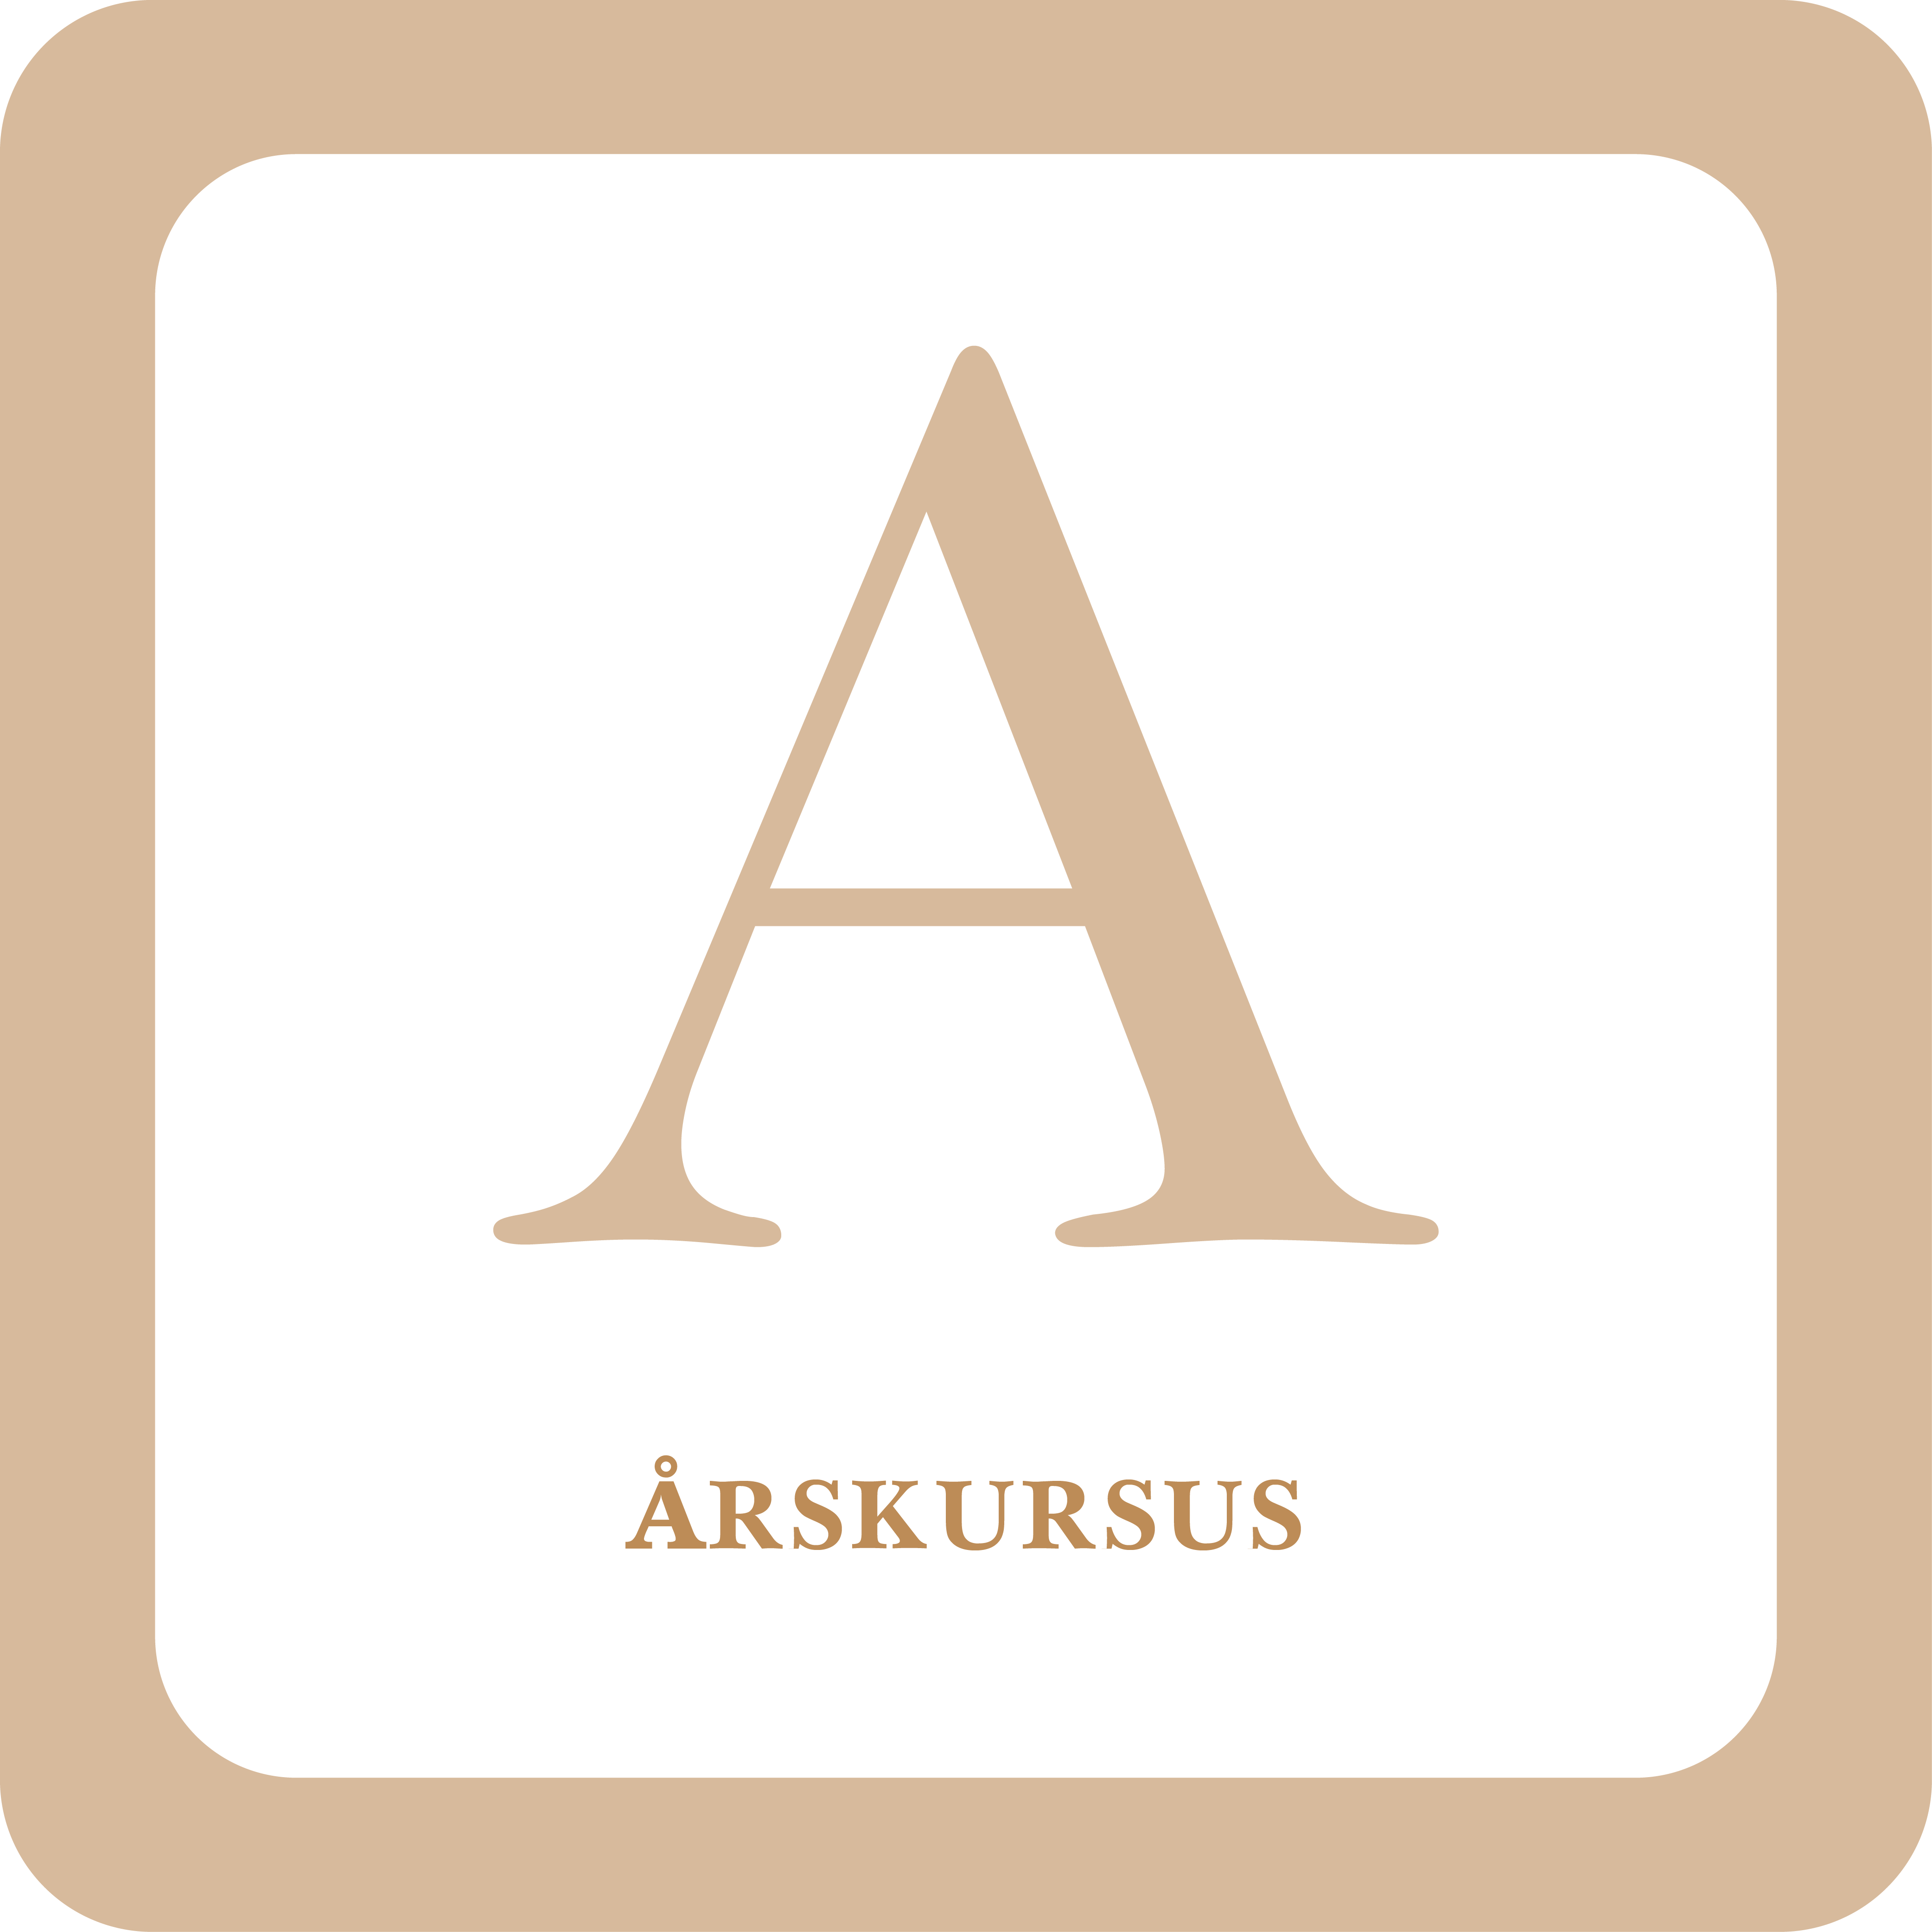 Read more about the article A Årskursus